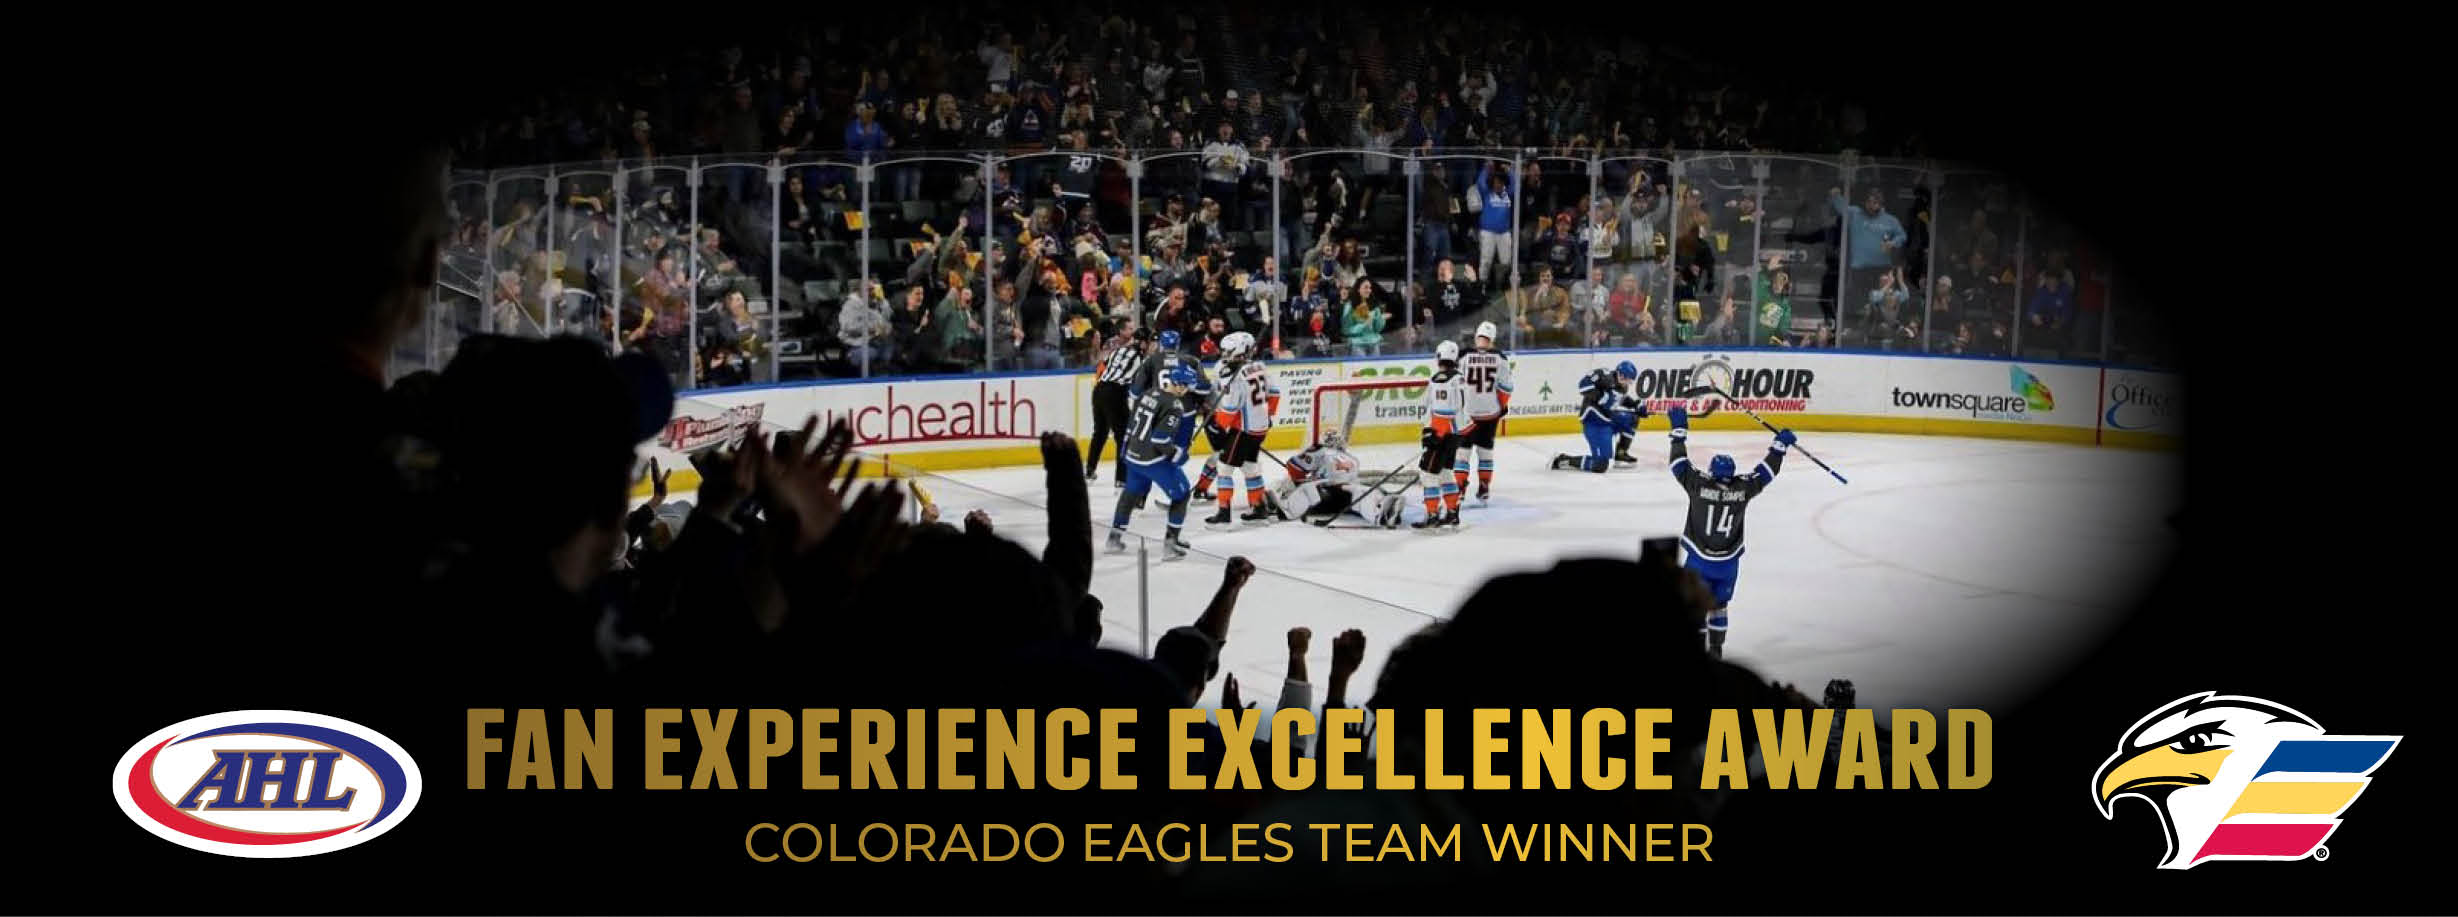 AHL RECOGNIZES EAGLES' AMAZING FAN BASE WITH EXCELLENCE IN FAN EXPERIENCE AWARD